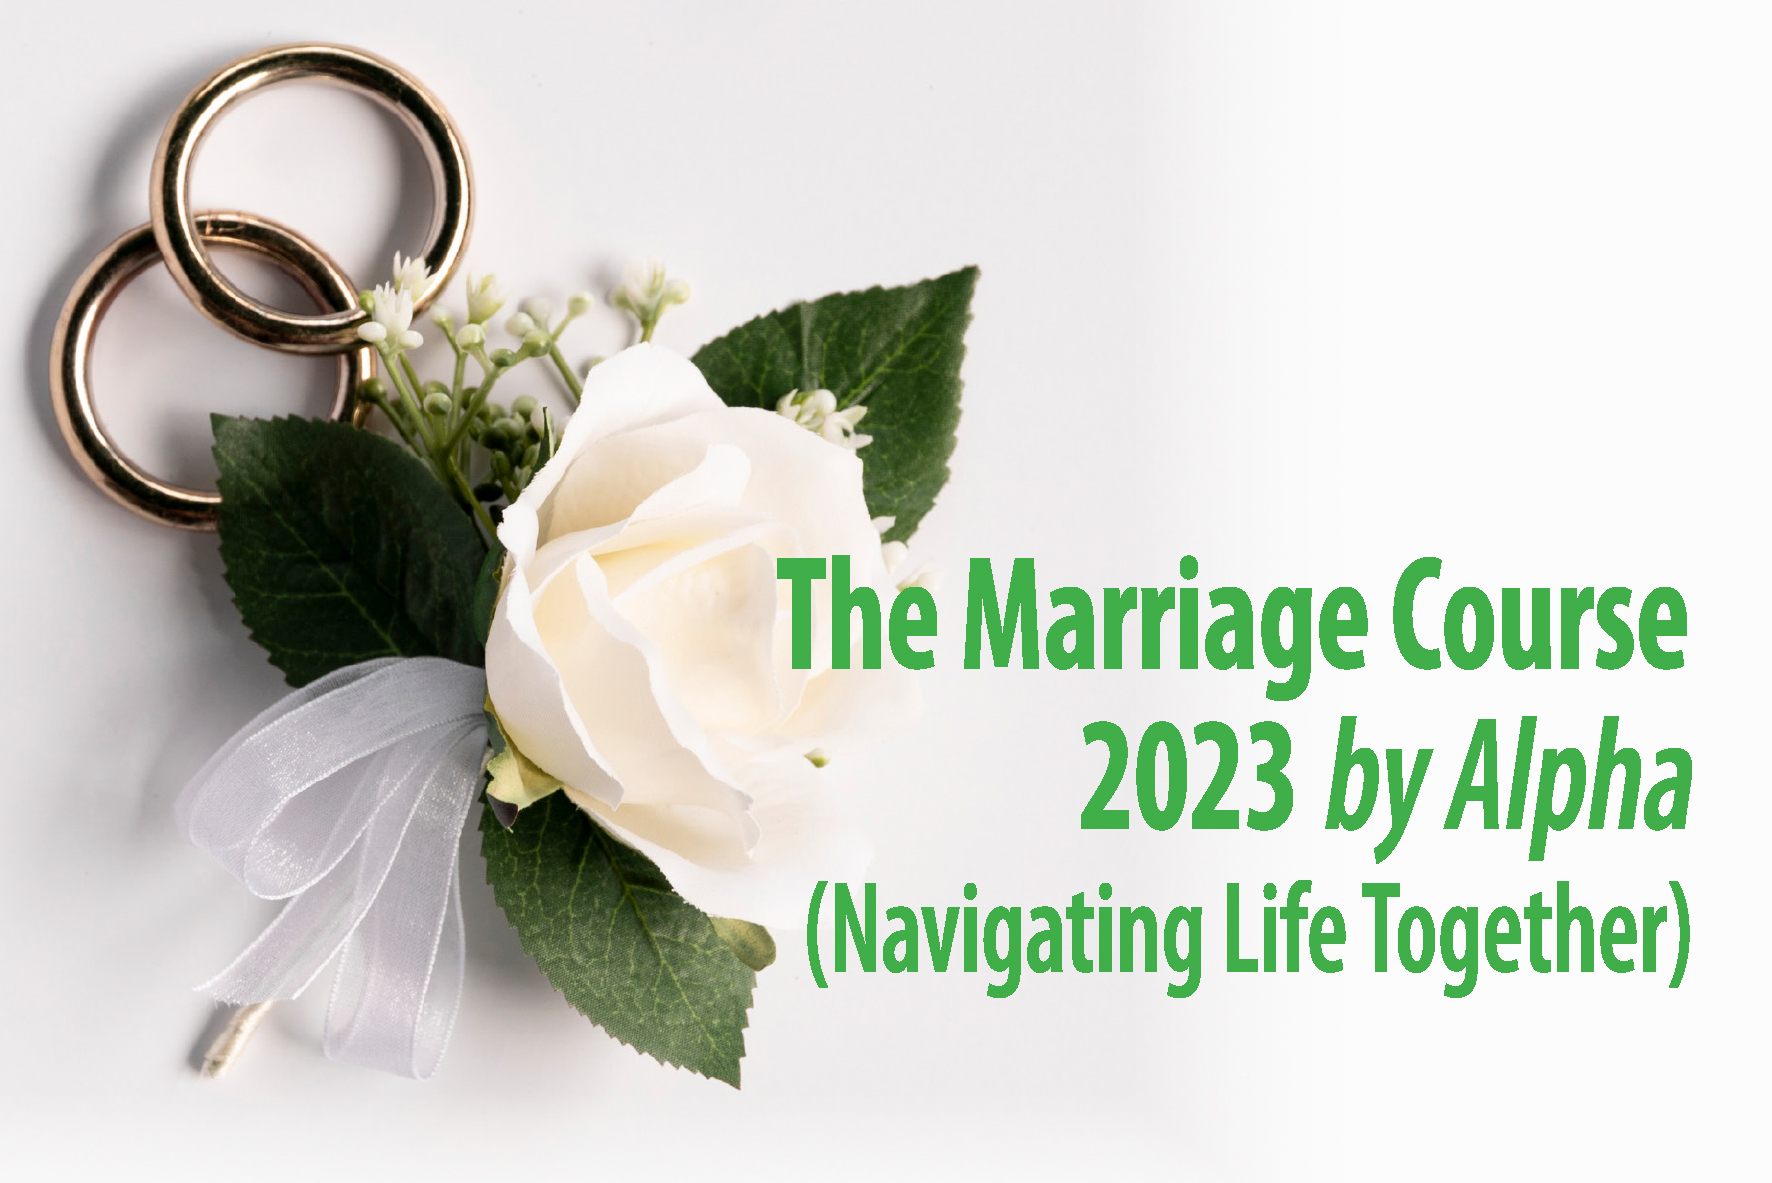 The Marriage Course 2023 by Alpha (Navigating Life Together)